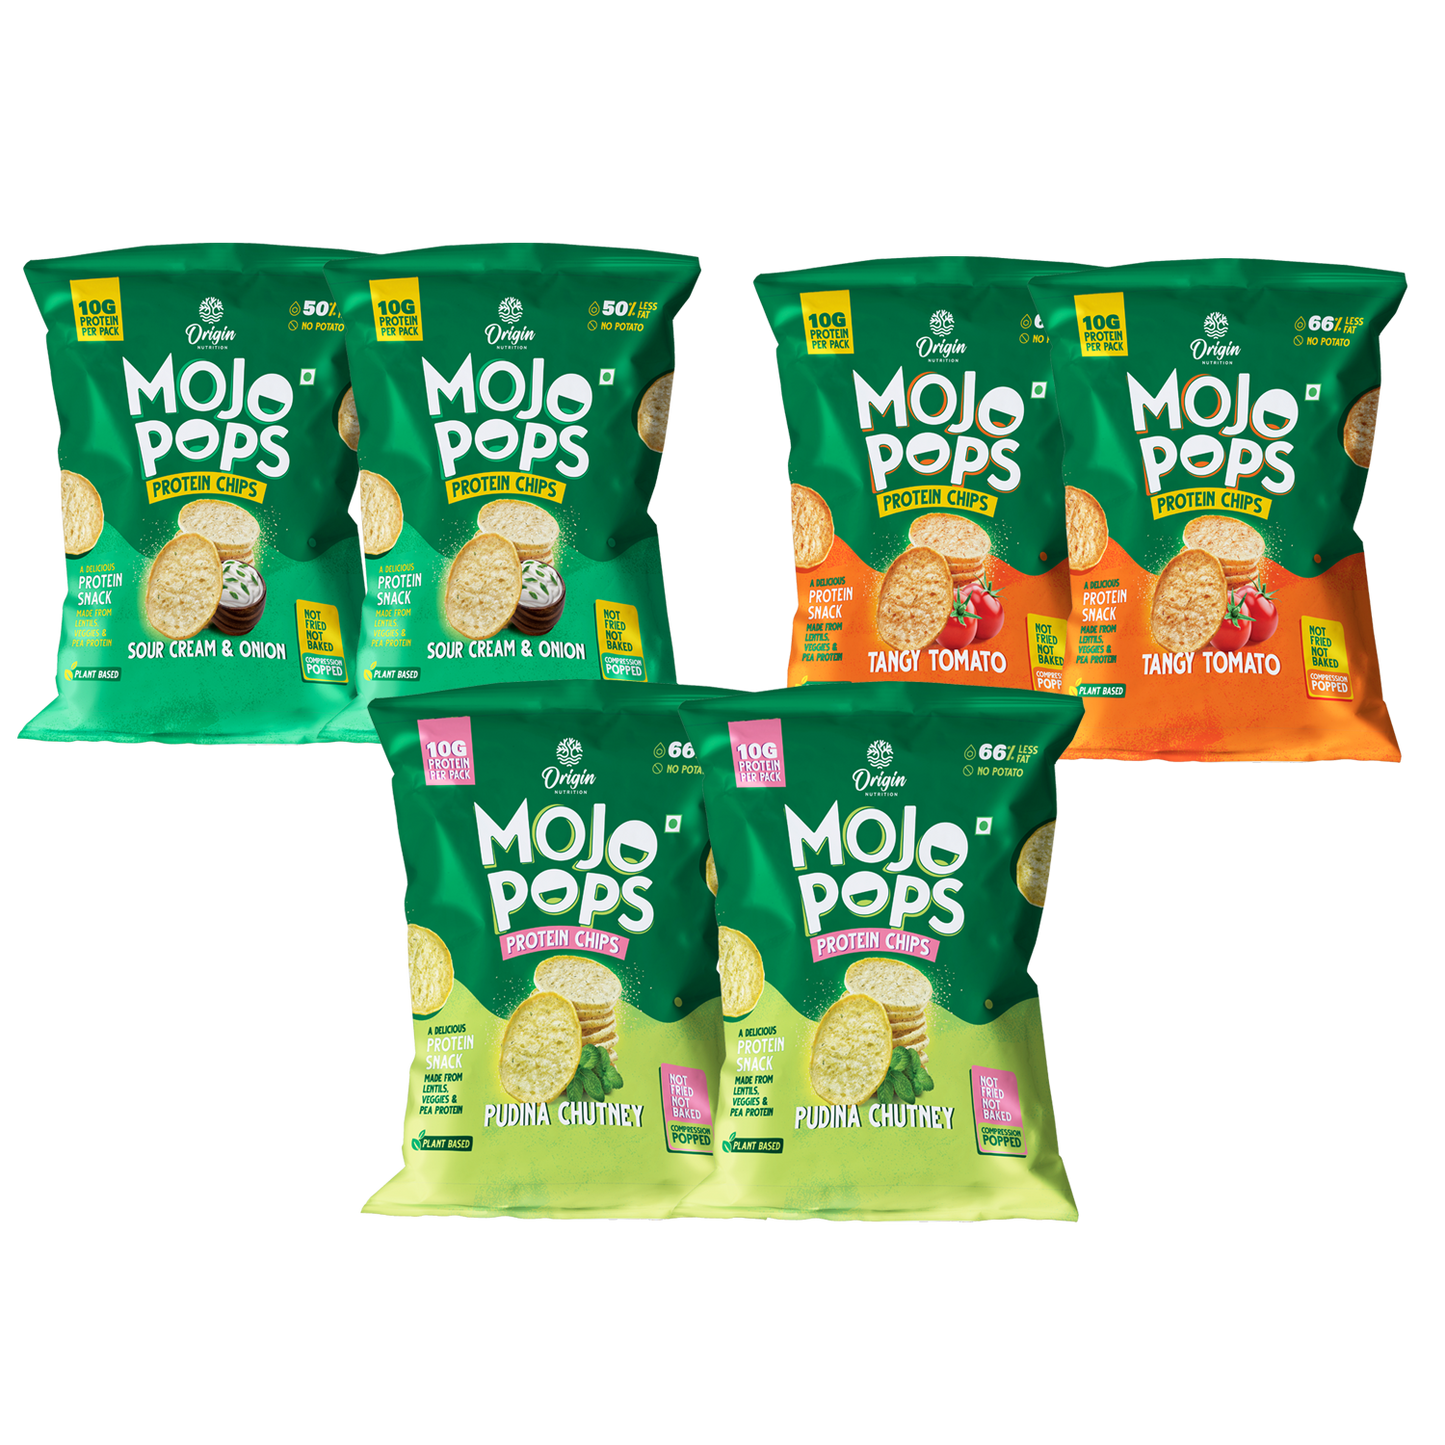 Origin Nutrition Mojo Pops Protein Chips in Assorted flavours 30g ( Pack of 6 ) (Compression Popped, 10g protein/pack)